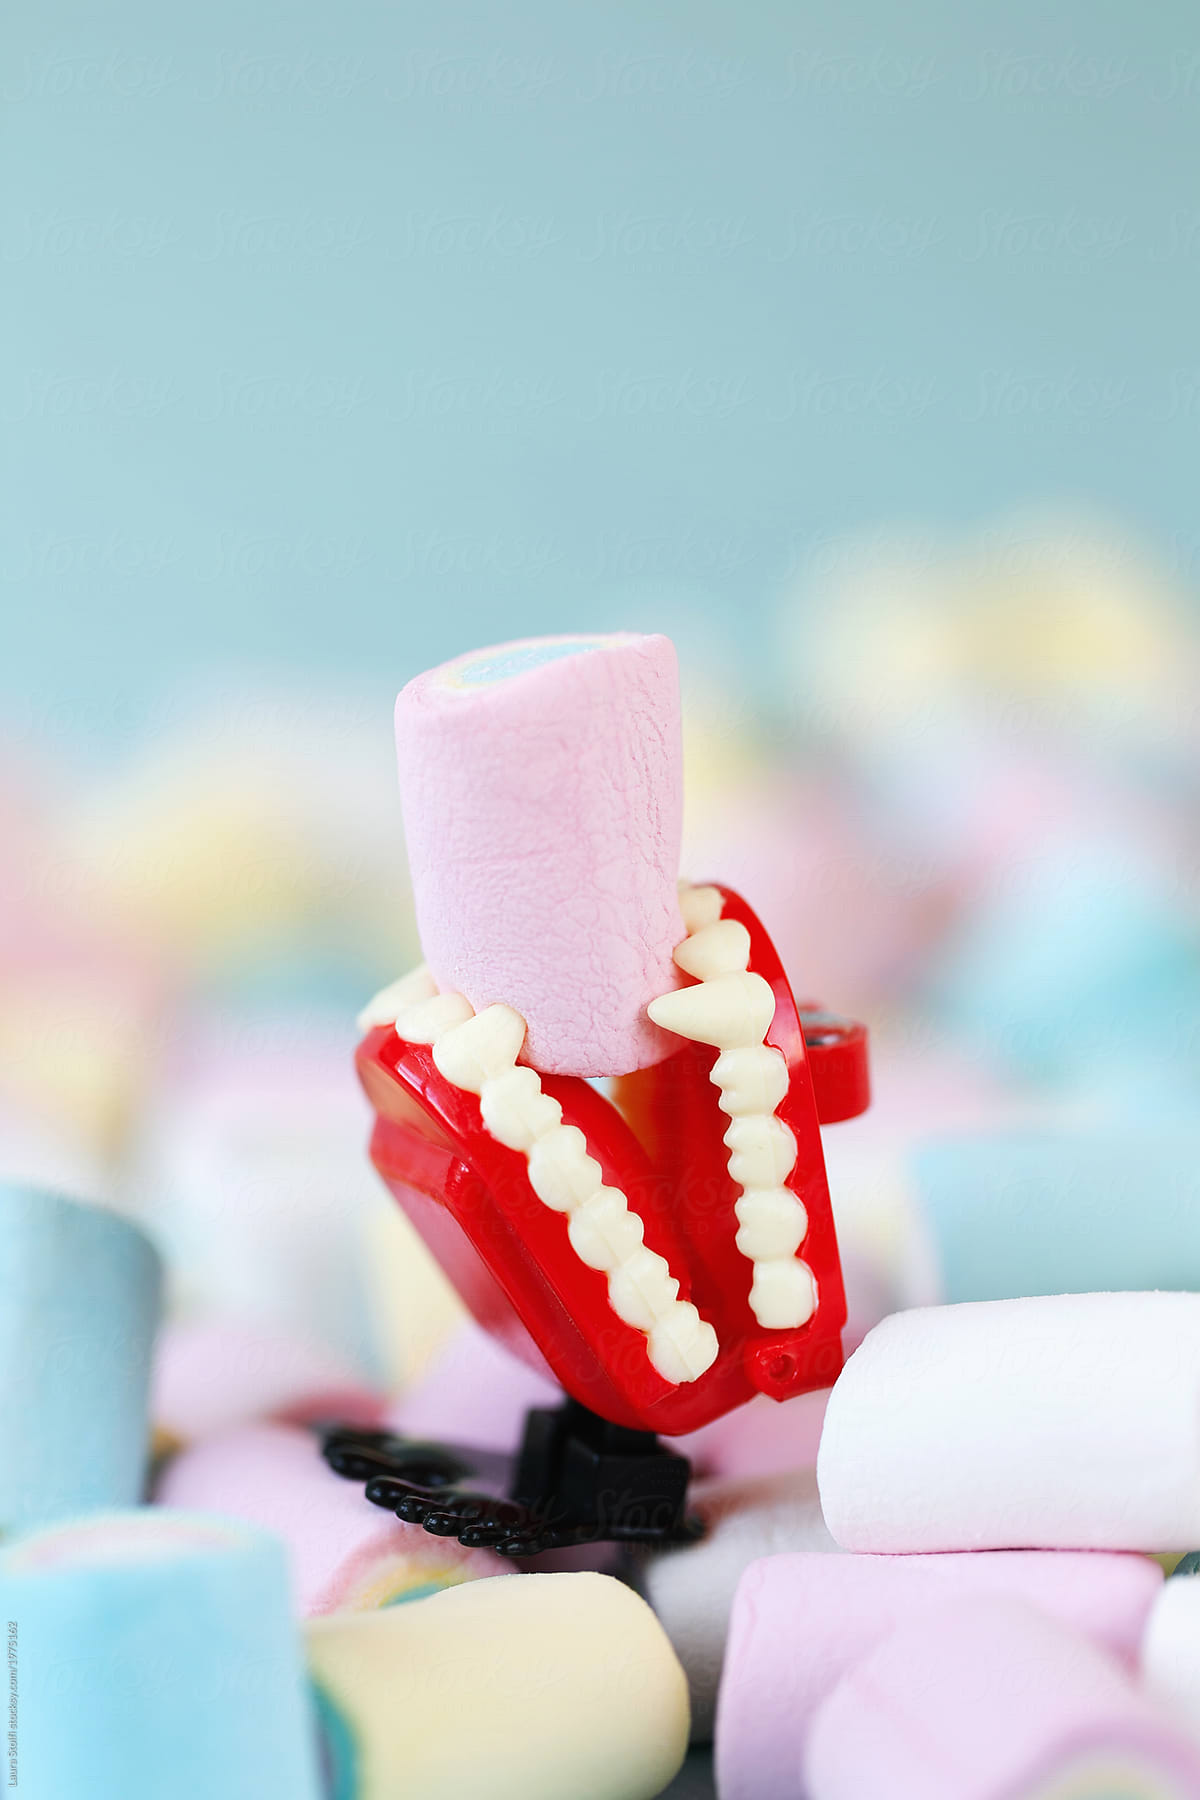 Close up of wind up teeth toy holding a candy in its mouth amongst lots of candies